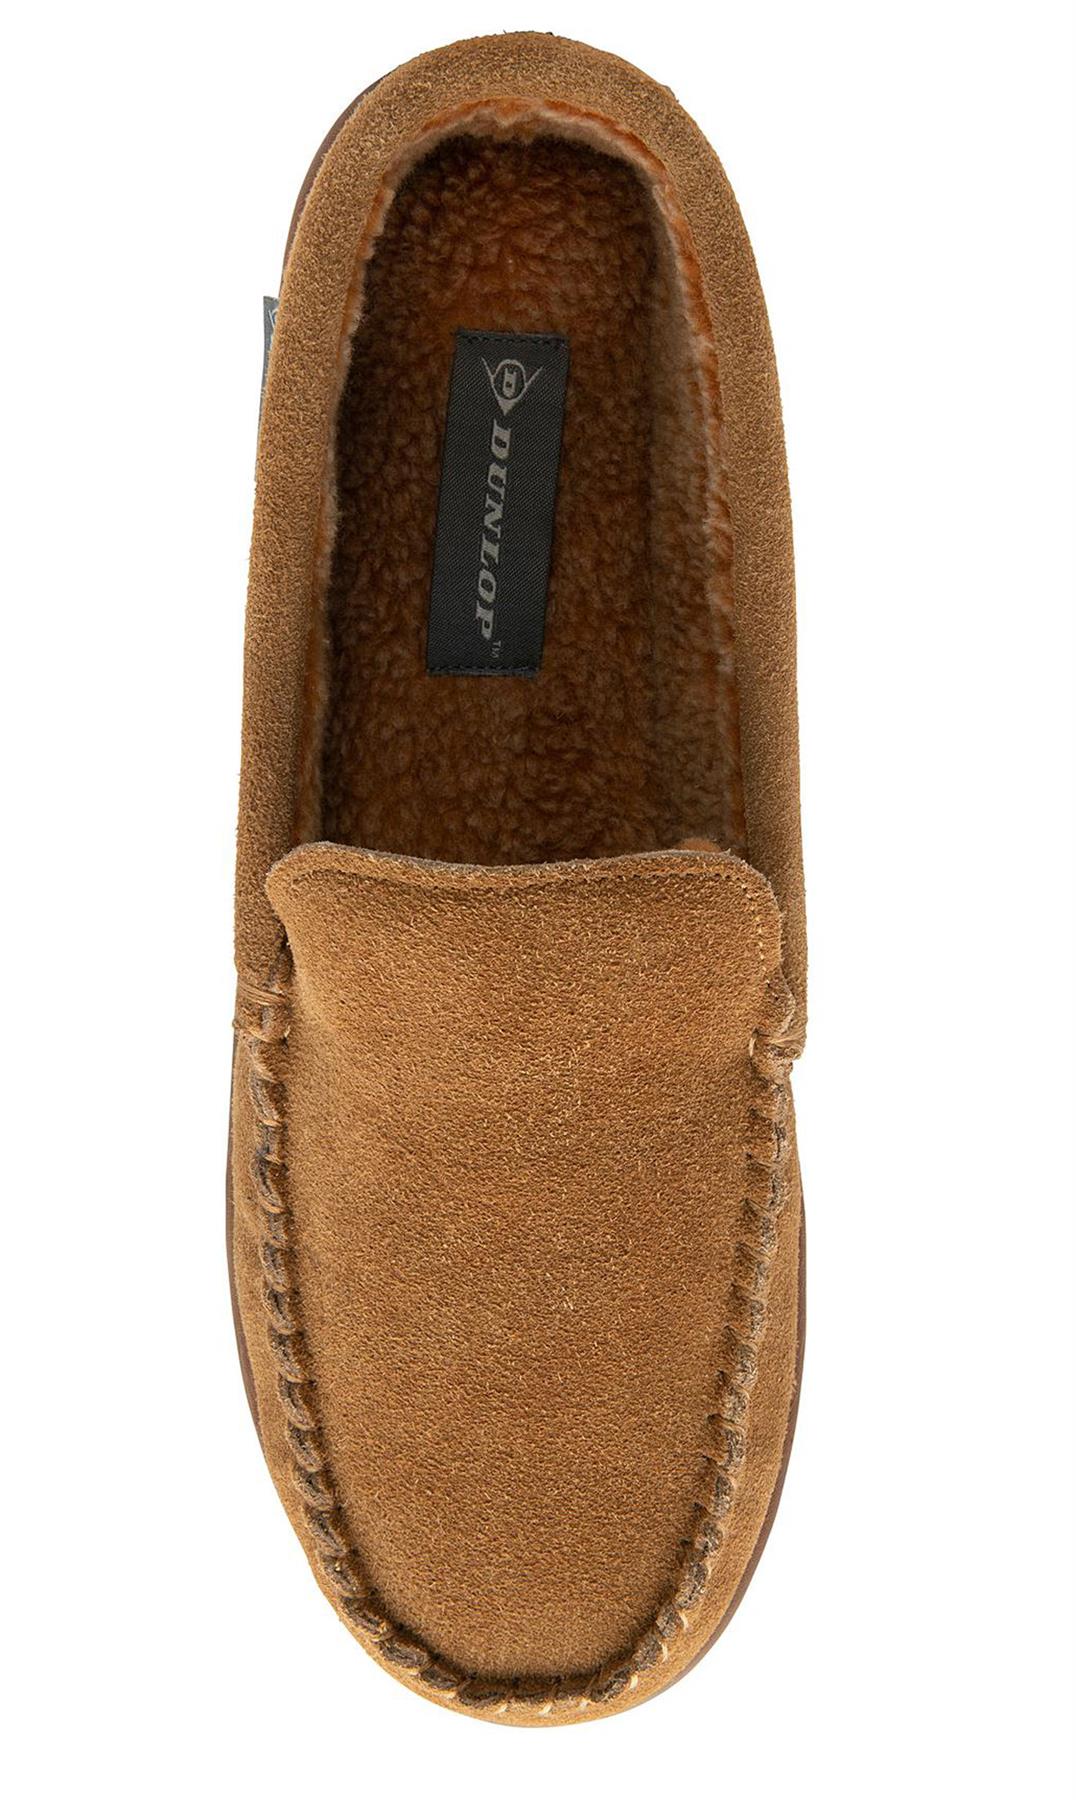 Dunlop Nathan Suede Leather Mens Memory Foam Loafer Slippers